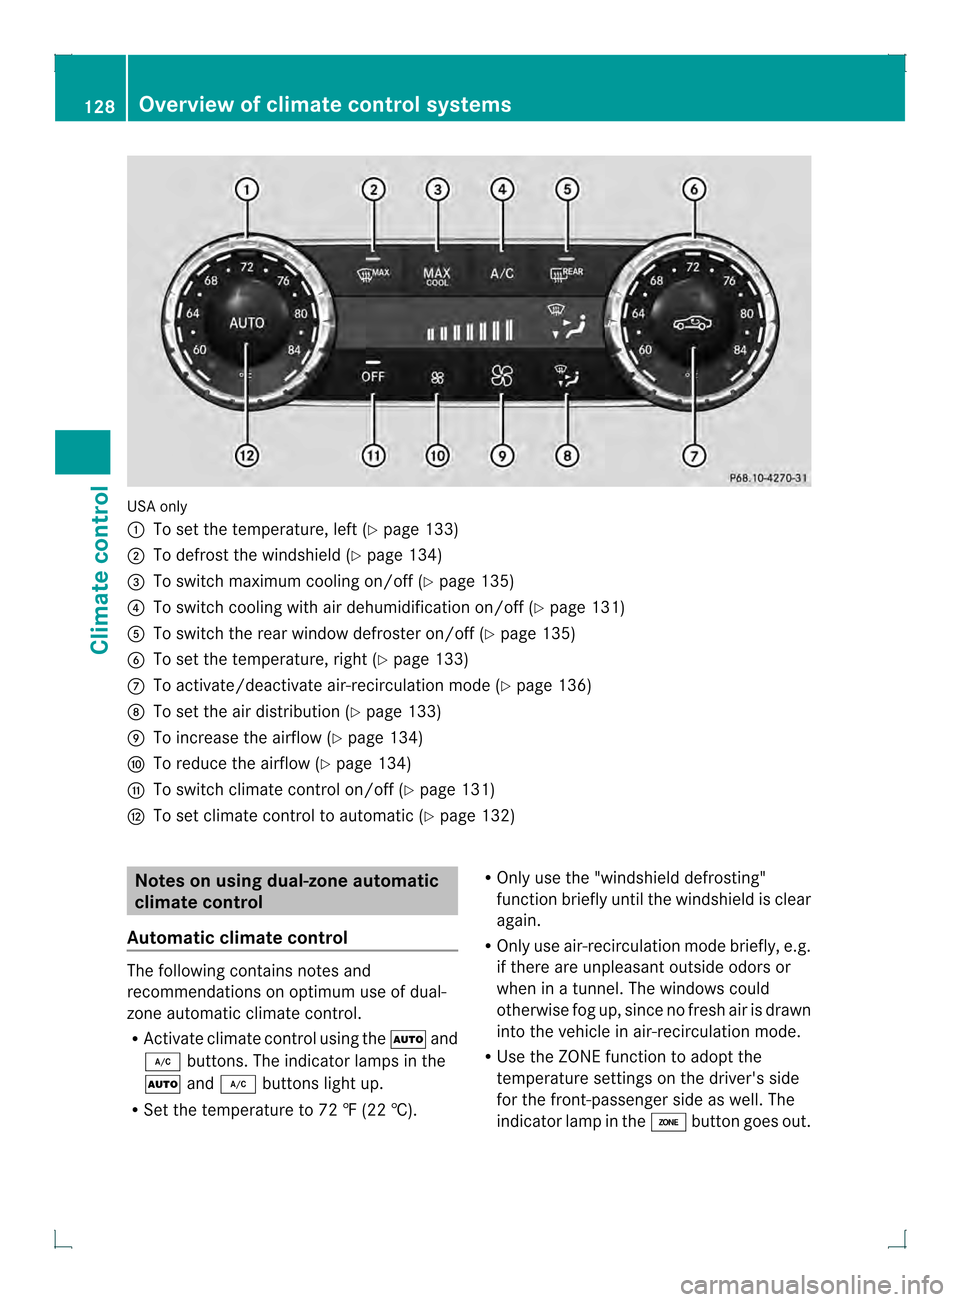 MERCEDES-BENZ GLK-Class 2013 X204 Owners Manual USA only
0002
To set the temperature, left (Y page 133)
0003 To defrost the windshield (Y page 134)
0021 To switch maximum cooling on/off (Y page 135)
0020 To switch cooling with air dehumidification 